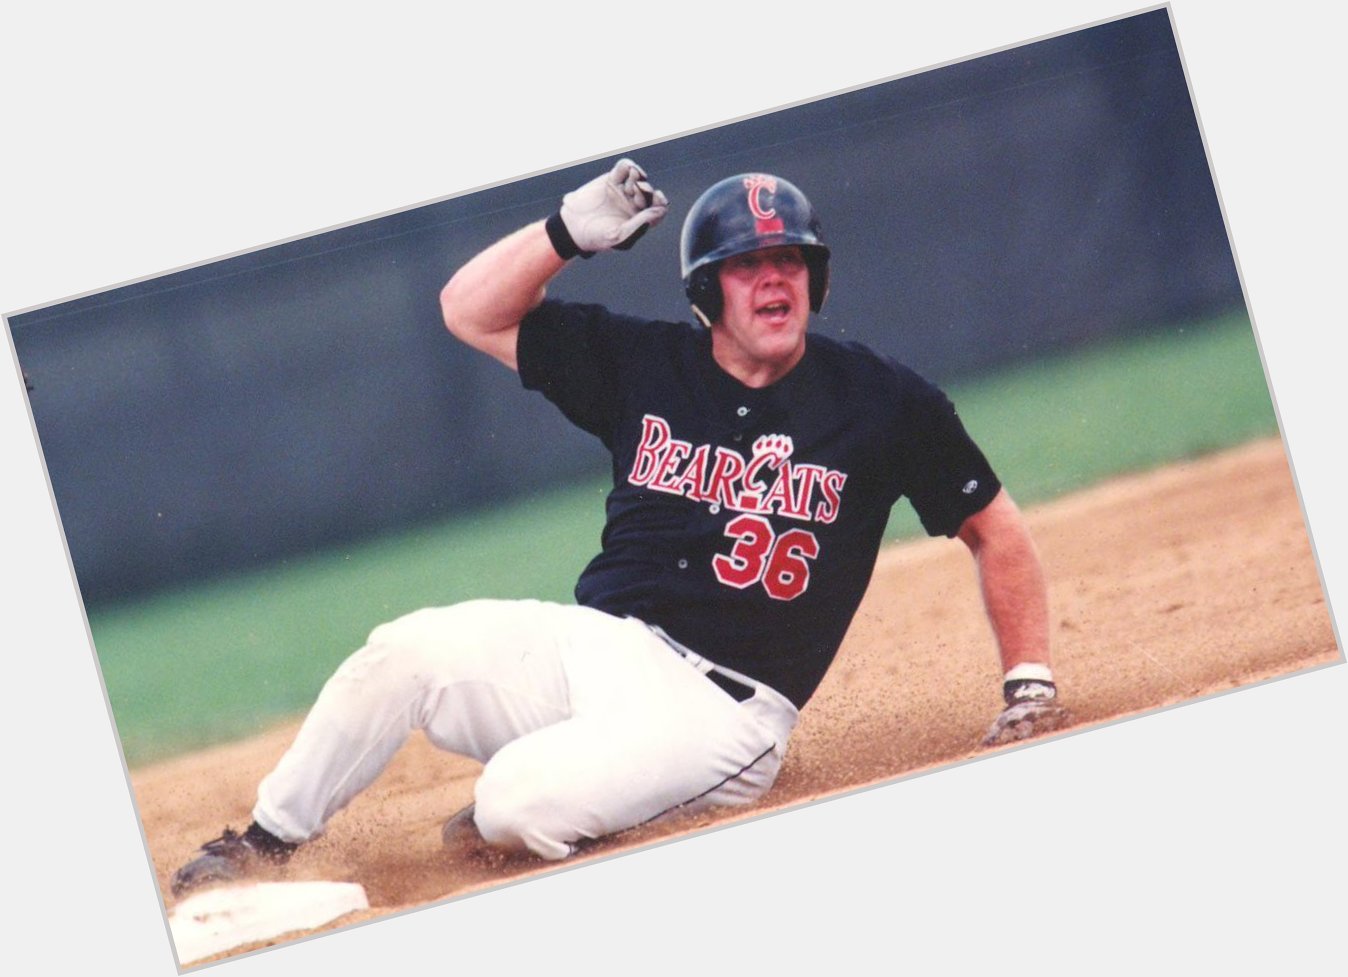 Happy Birthday to Bearcats and MLB legend Kevin Youkilis 